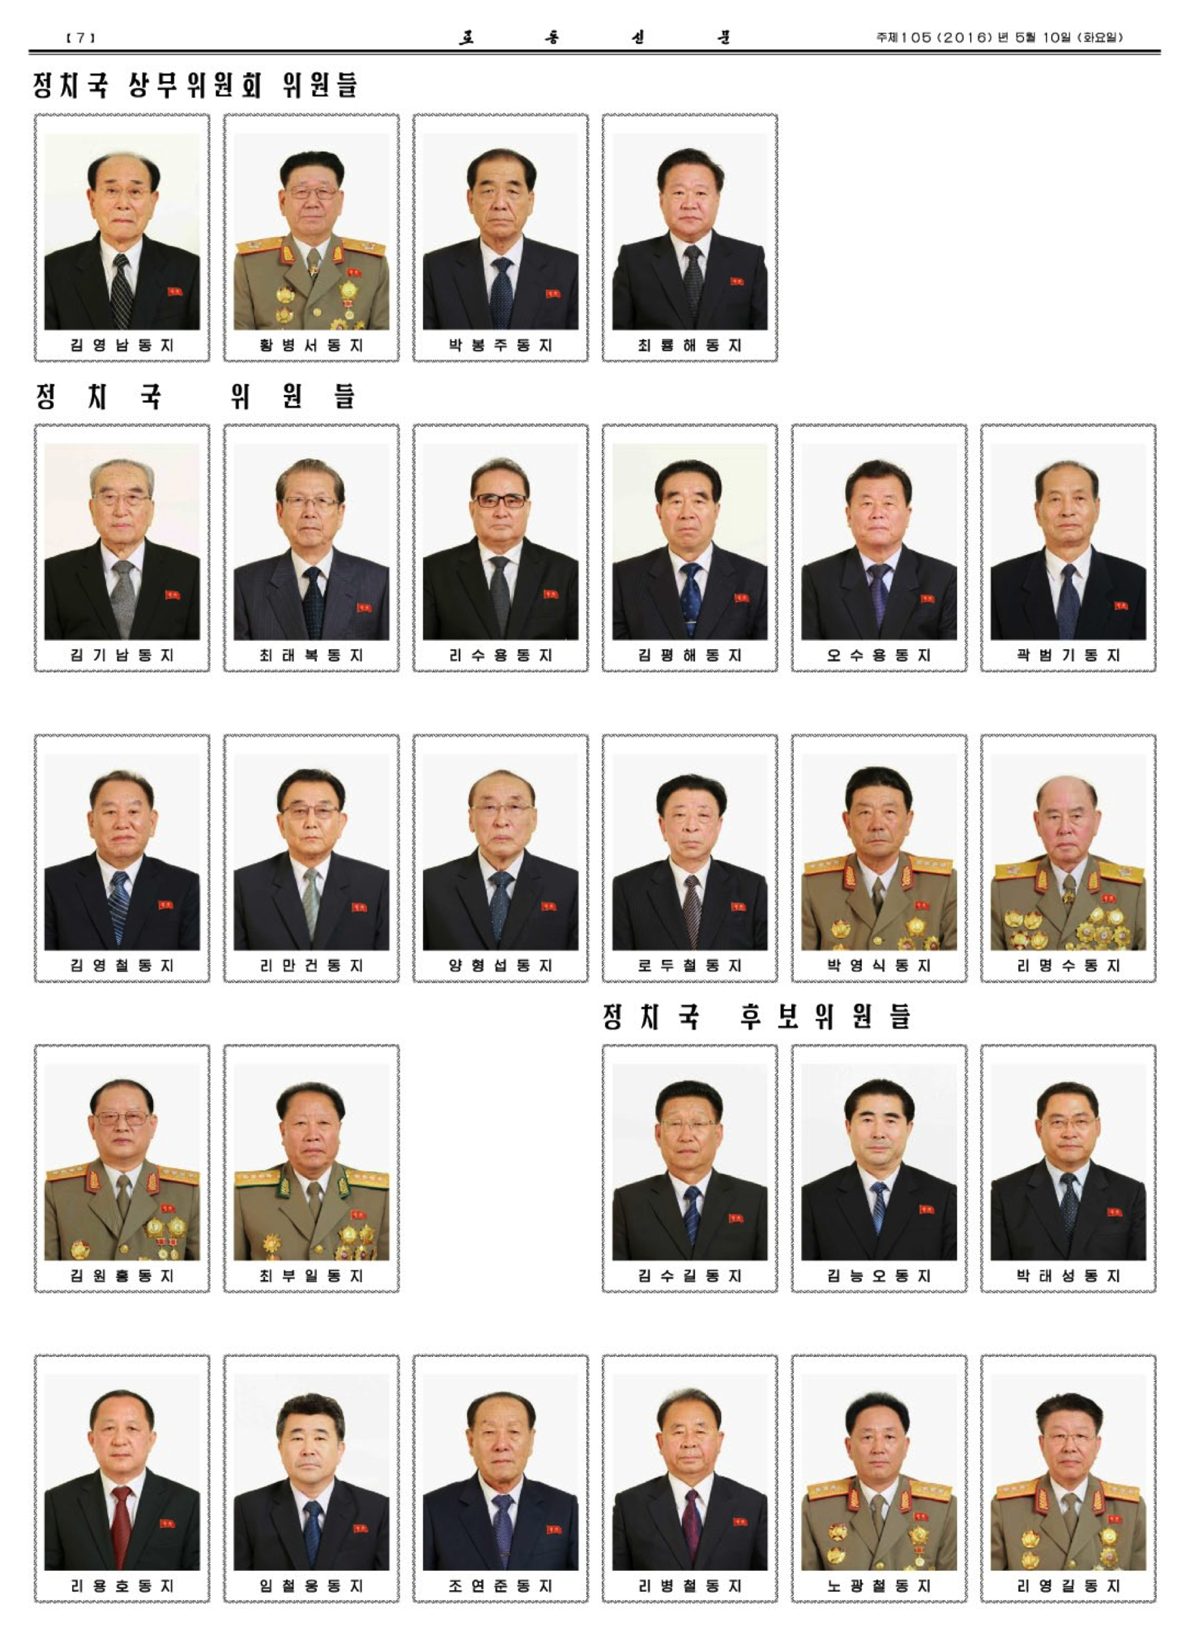 May 10, 2016 edition of Rodong Sinmun showing WPK Political Bureau Members and Alternates with government and party officials ahead of KPA officials.